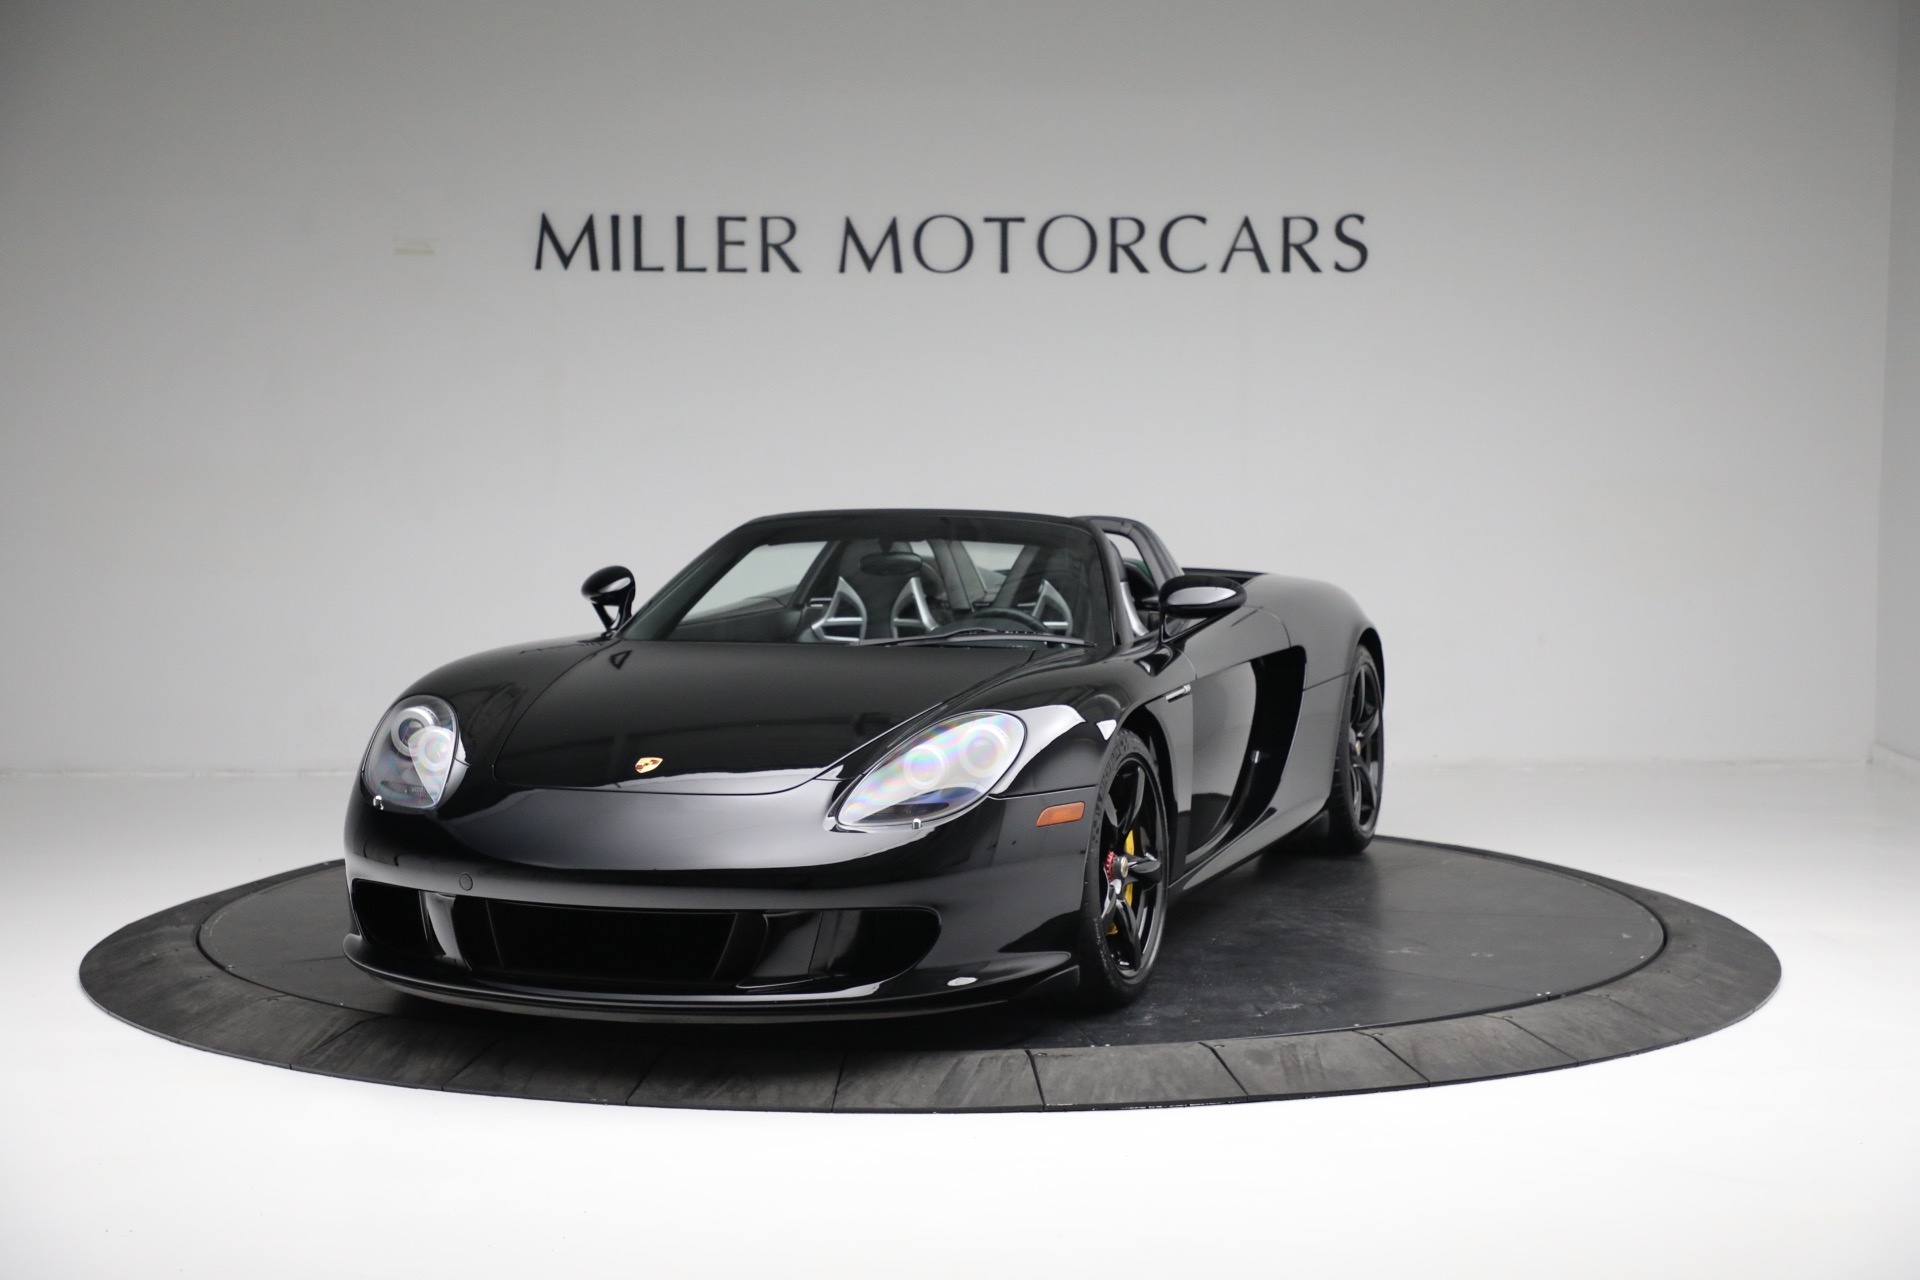 Used 2005 Porsche Carrera GT for sale $1,550,000 at Bentley Greenwich in Greenwich CT 06830 1